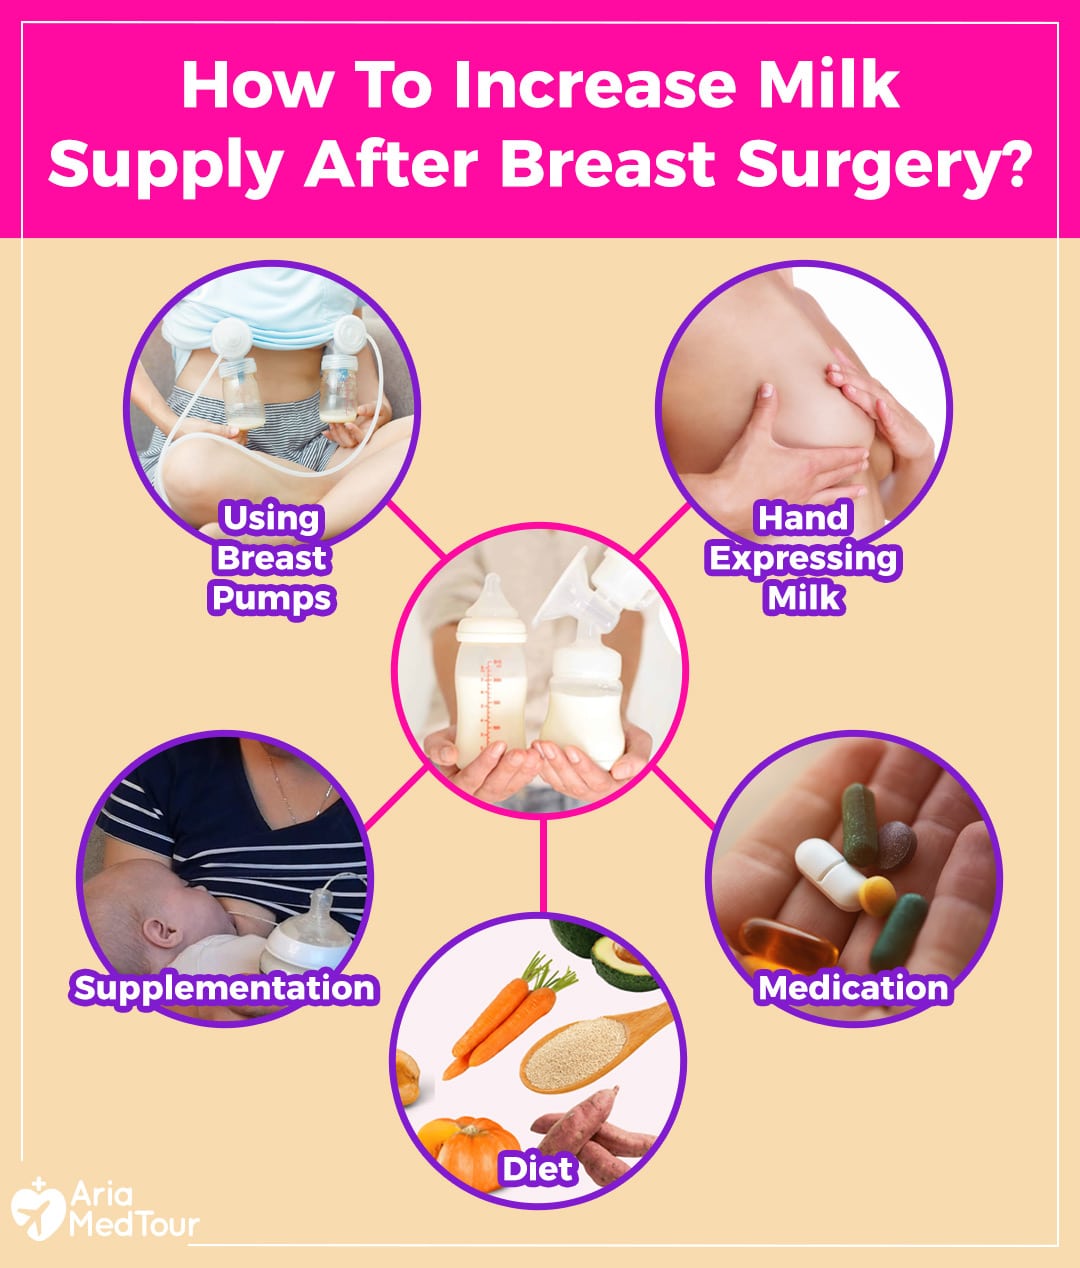 factors on how to increase milk supply after breast surgery